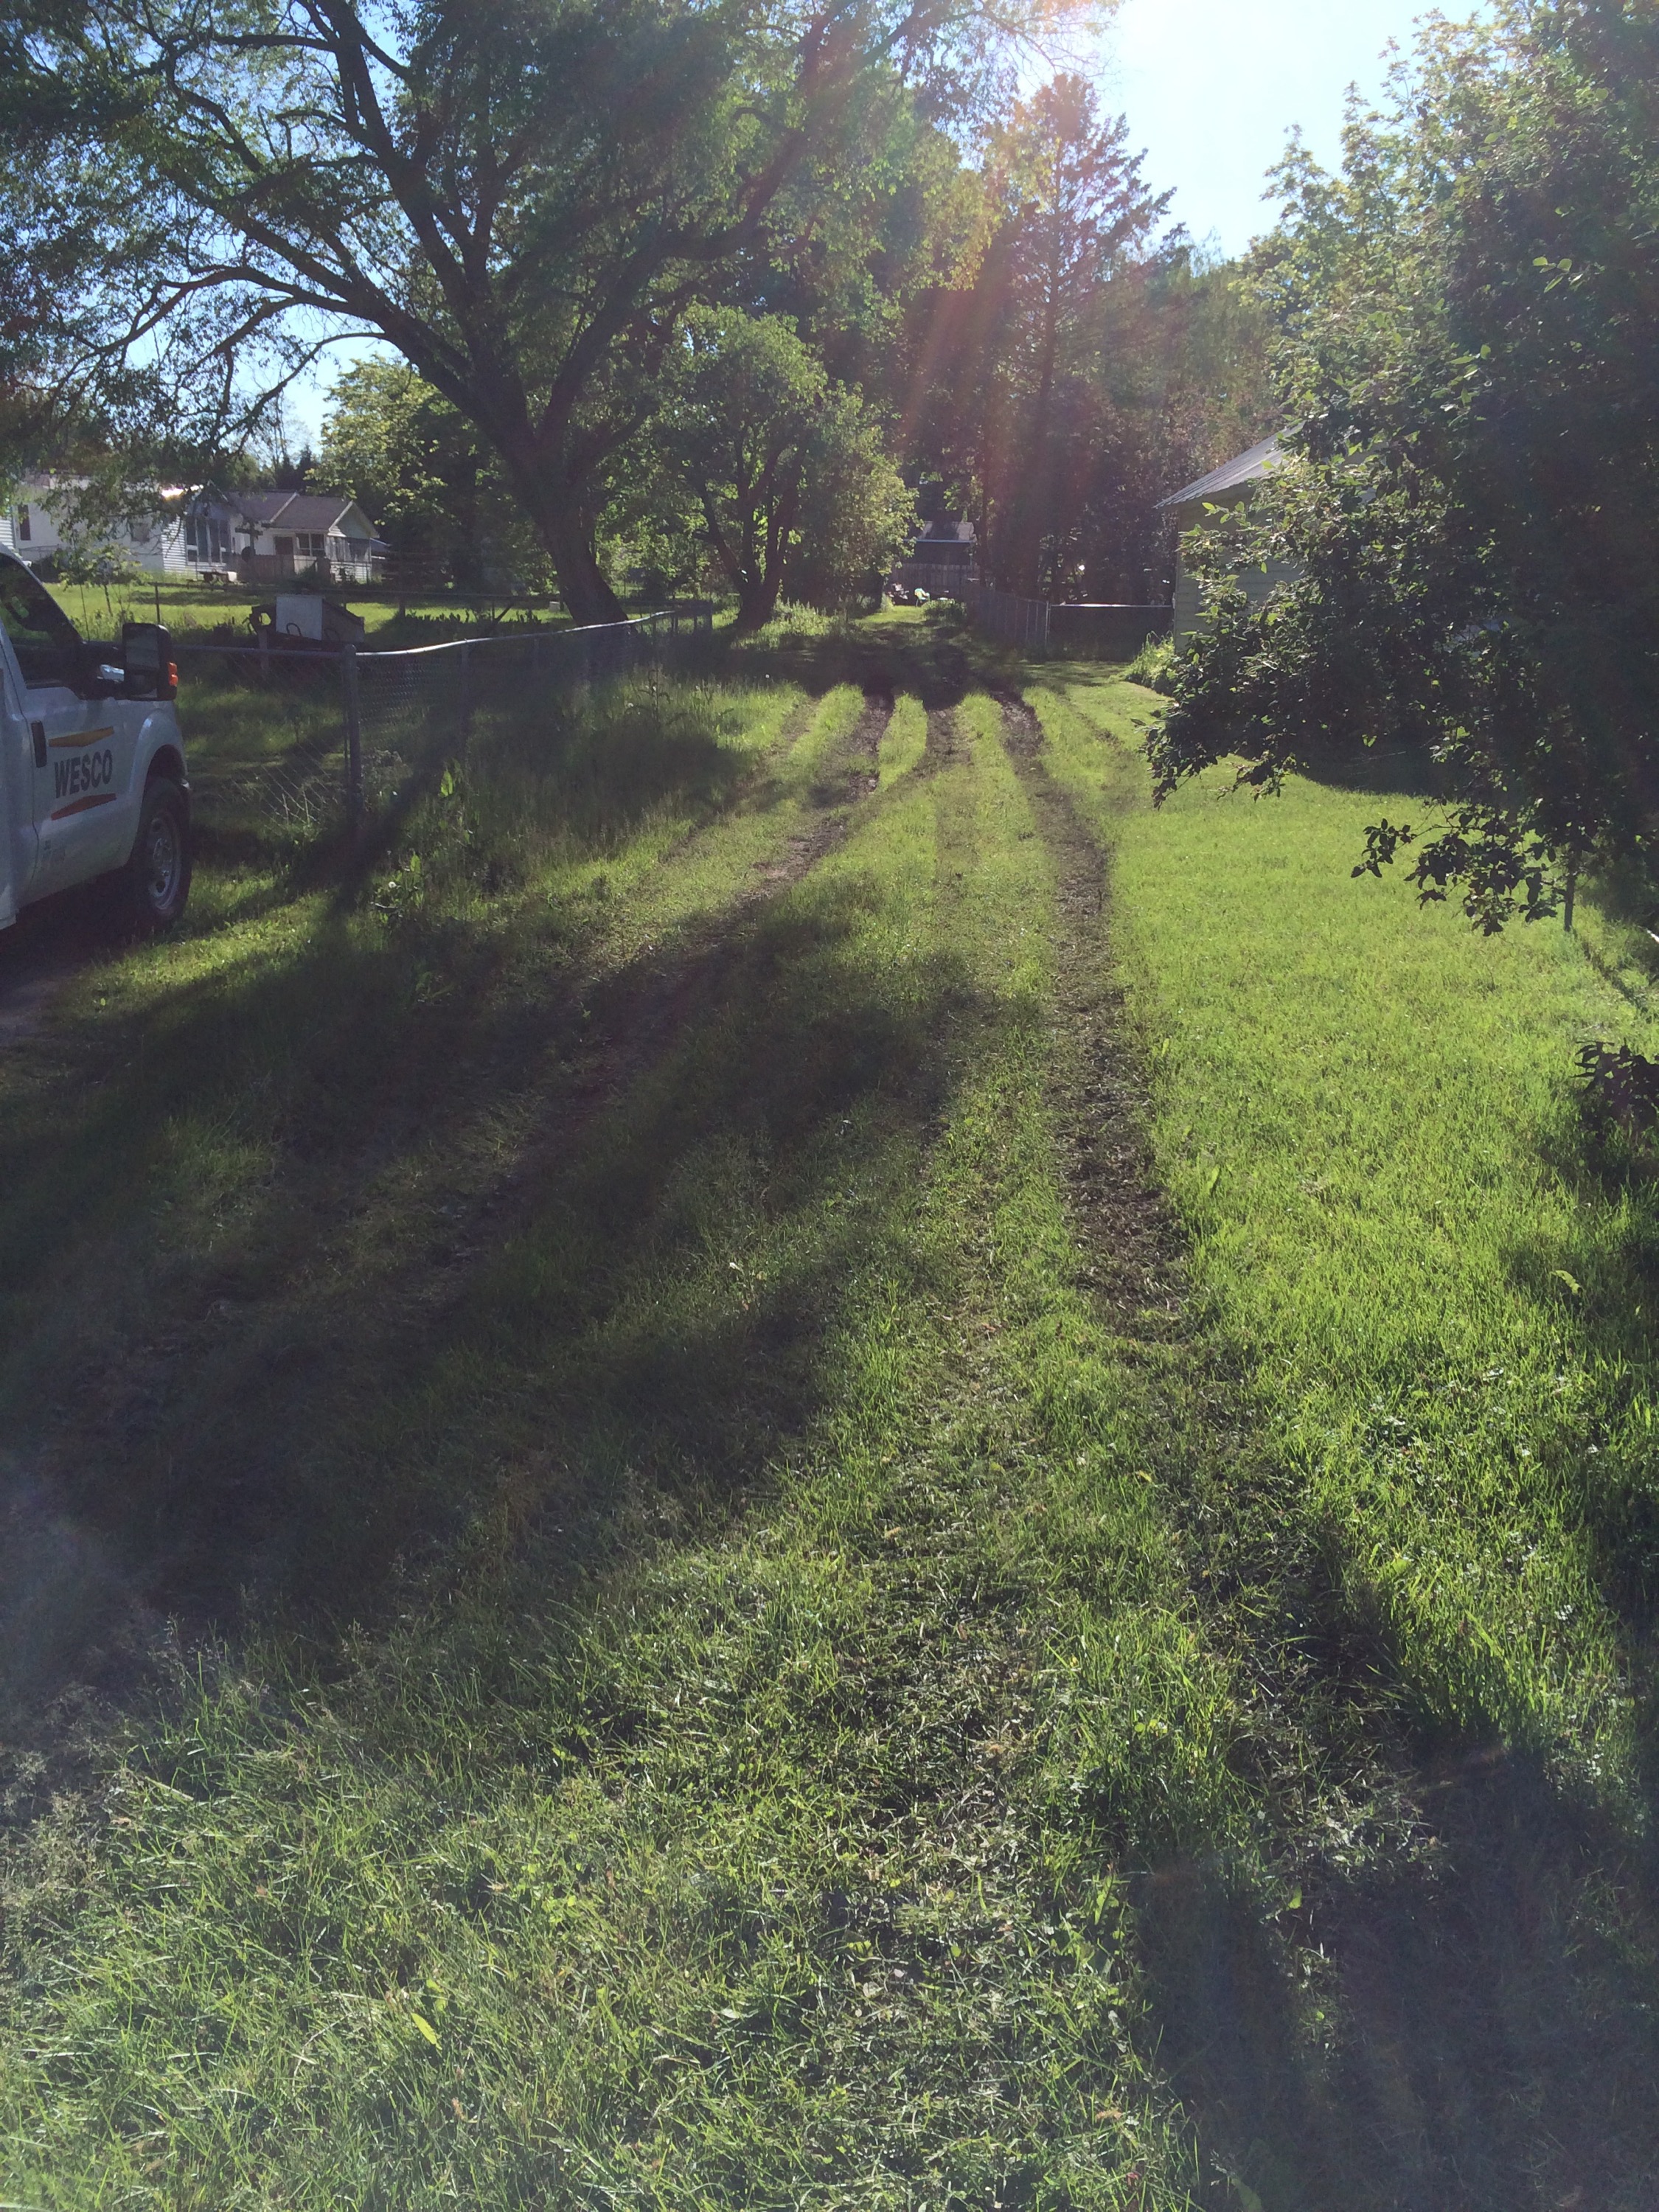 Scottville abandons alley that has caused conflict among neighbors.